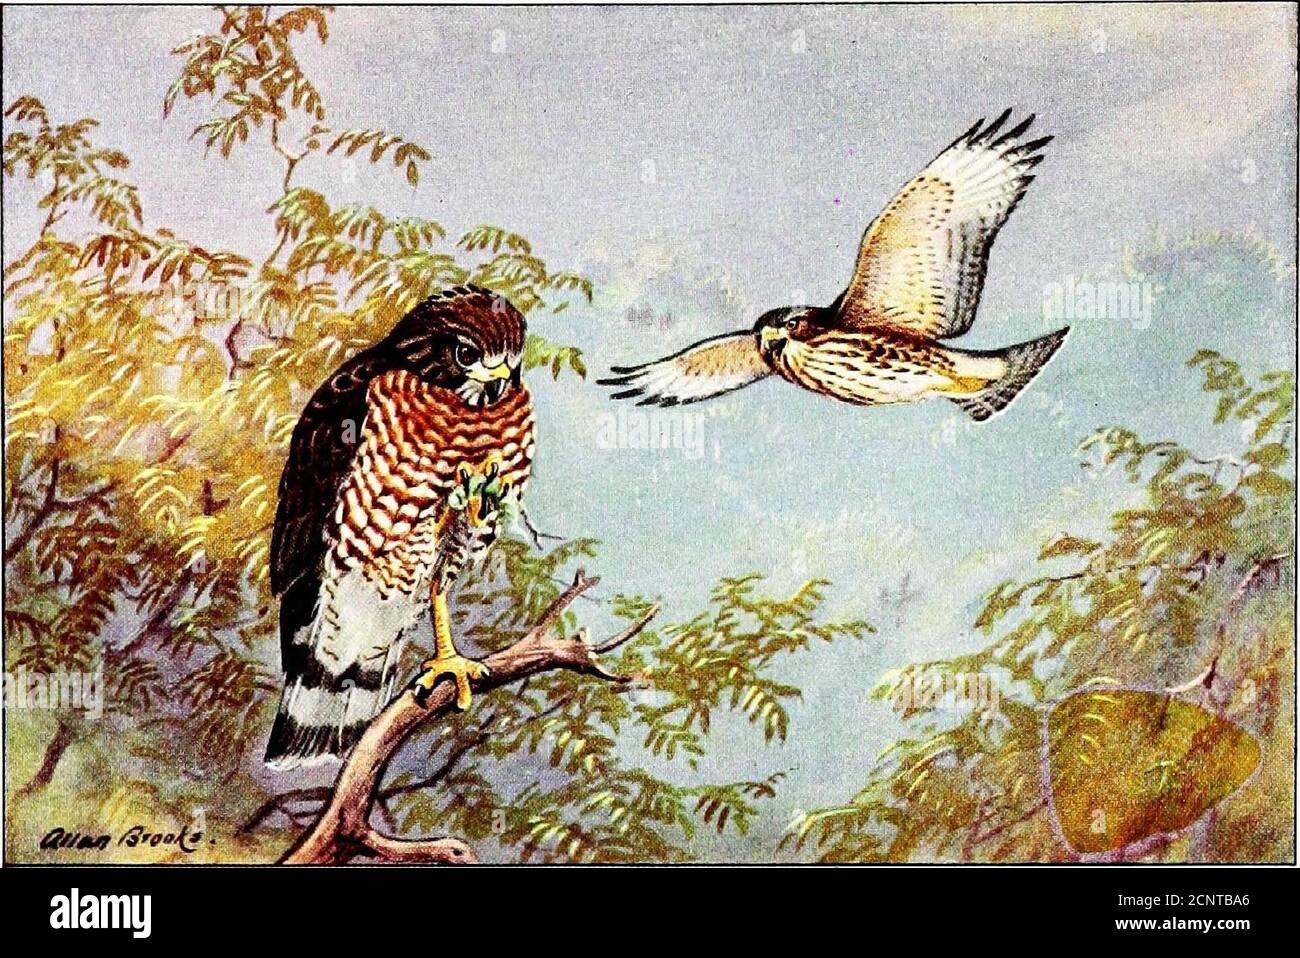 . Falconry, the sport of kings . RED-TAILED HAWK V Upper; ndults perched and flying above, immature bird flying-at left , i Approximate!; uiil sl Liilh iiauiral 3ueRED-SHOULDERED HAWK Lower; adult (left),[1 iinmature bird (right) ^C.Kh V^.iS SbV Cv,Vit , nci . WiU VII ^^^^^^ 4- THE NATIONAL GEOGRAPHIC MAGAZINE. V- ,V i/ / Stock Photo